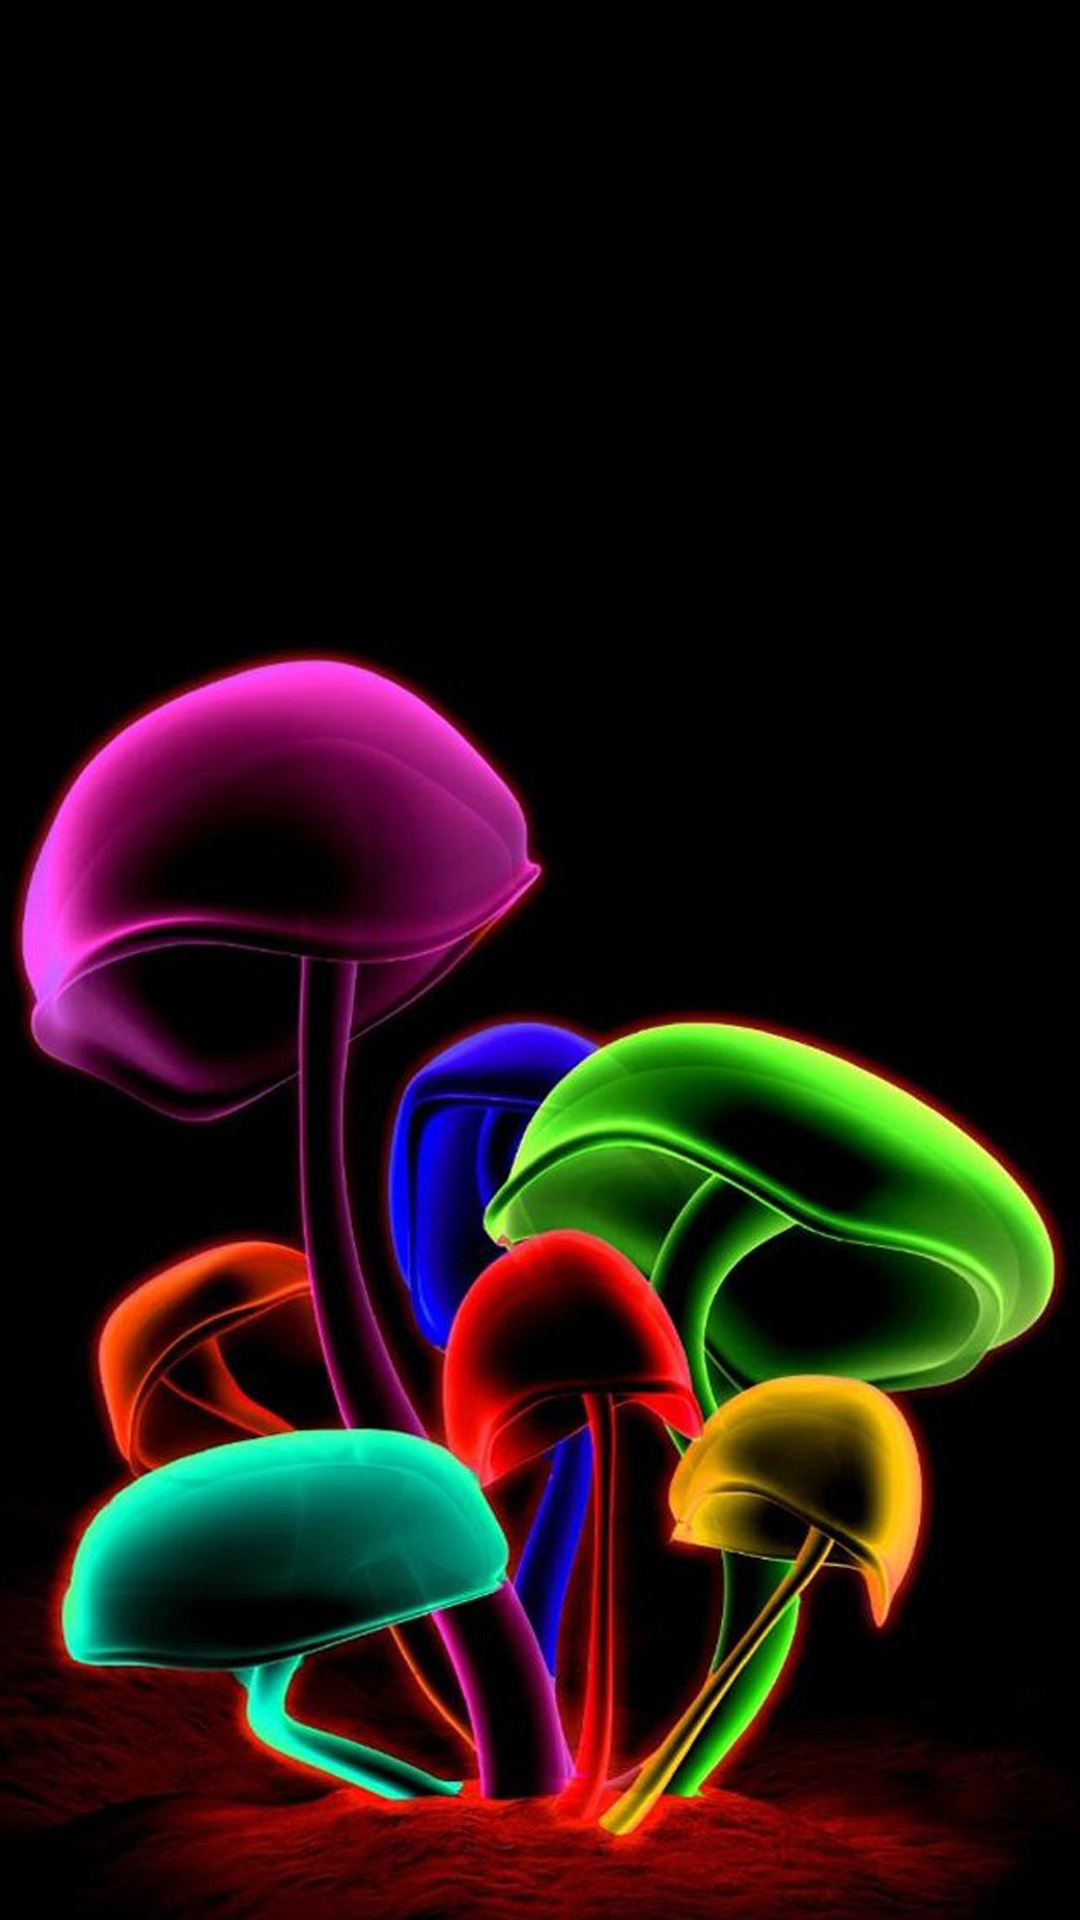 Phone wallpaper 3D colorful lights - Wallpapers Download 2023